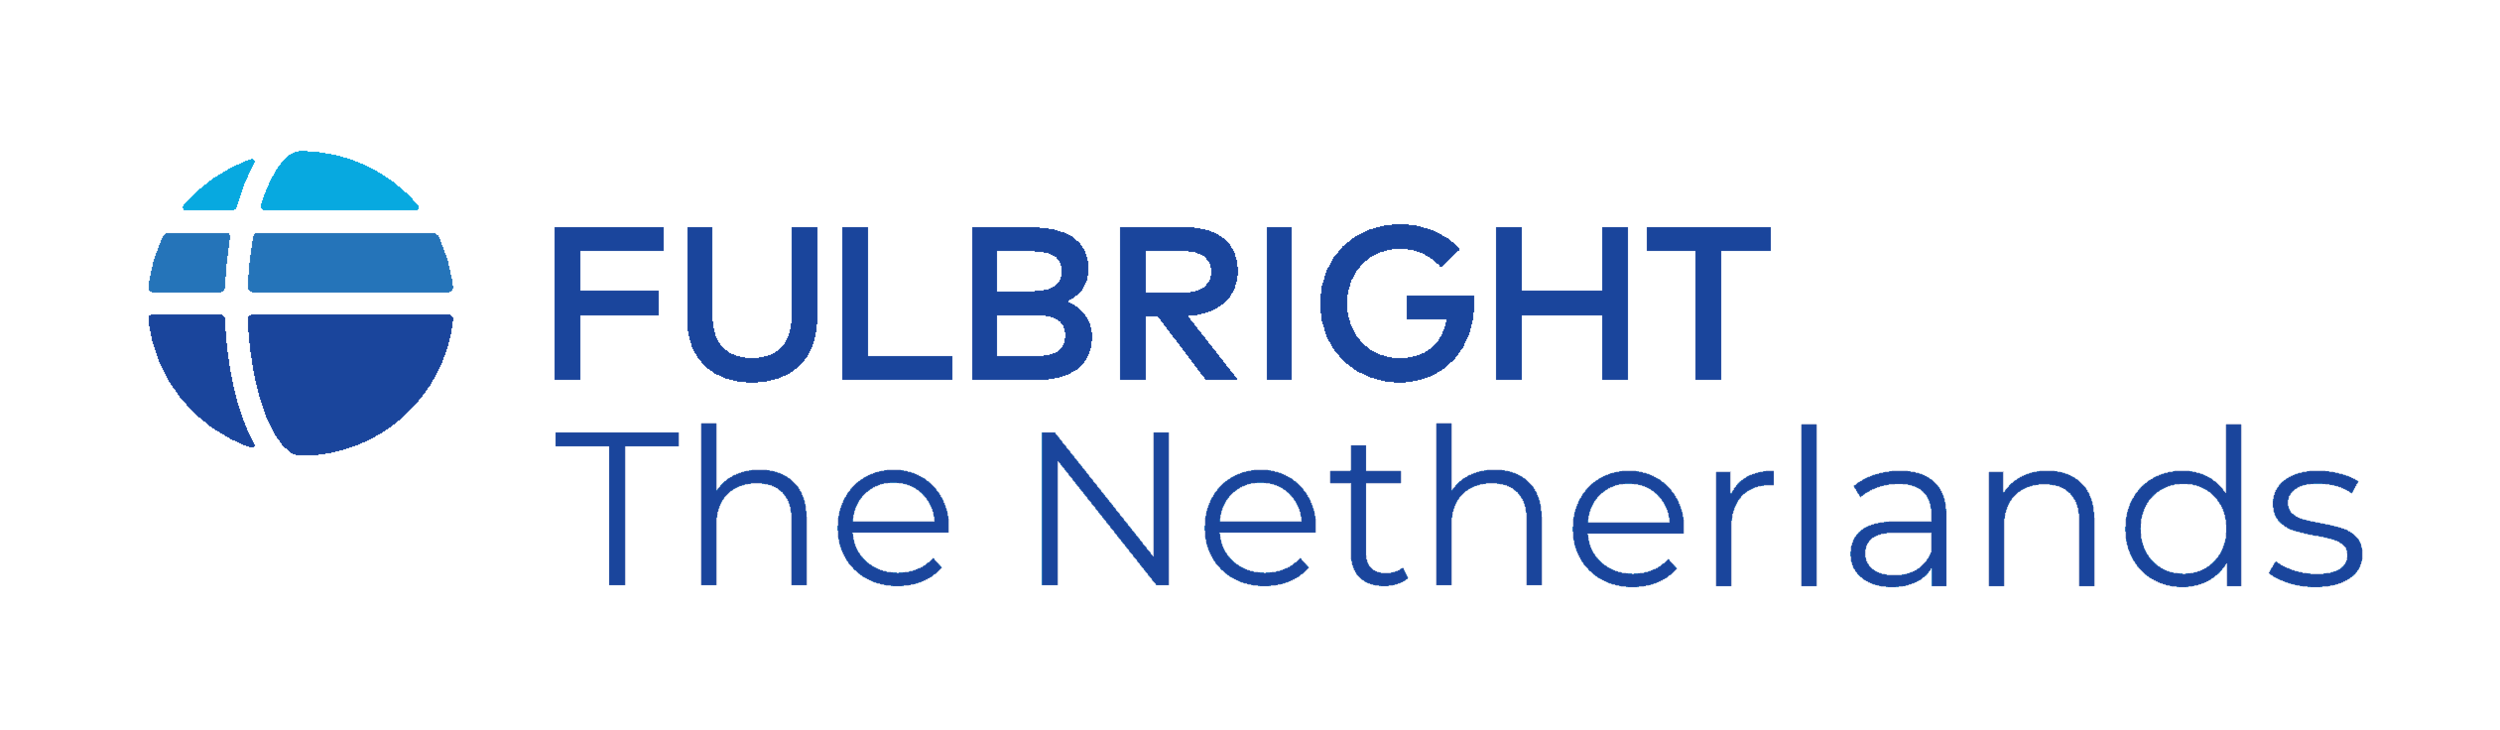 Fulbright_logo_complete (1).png